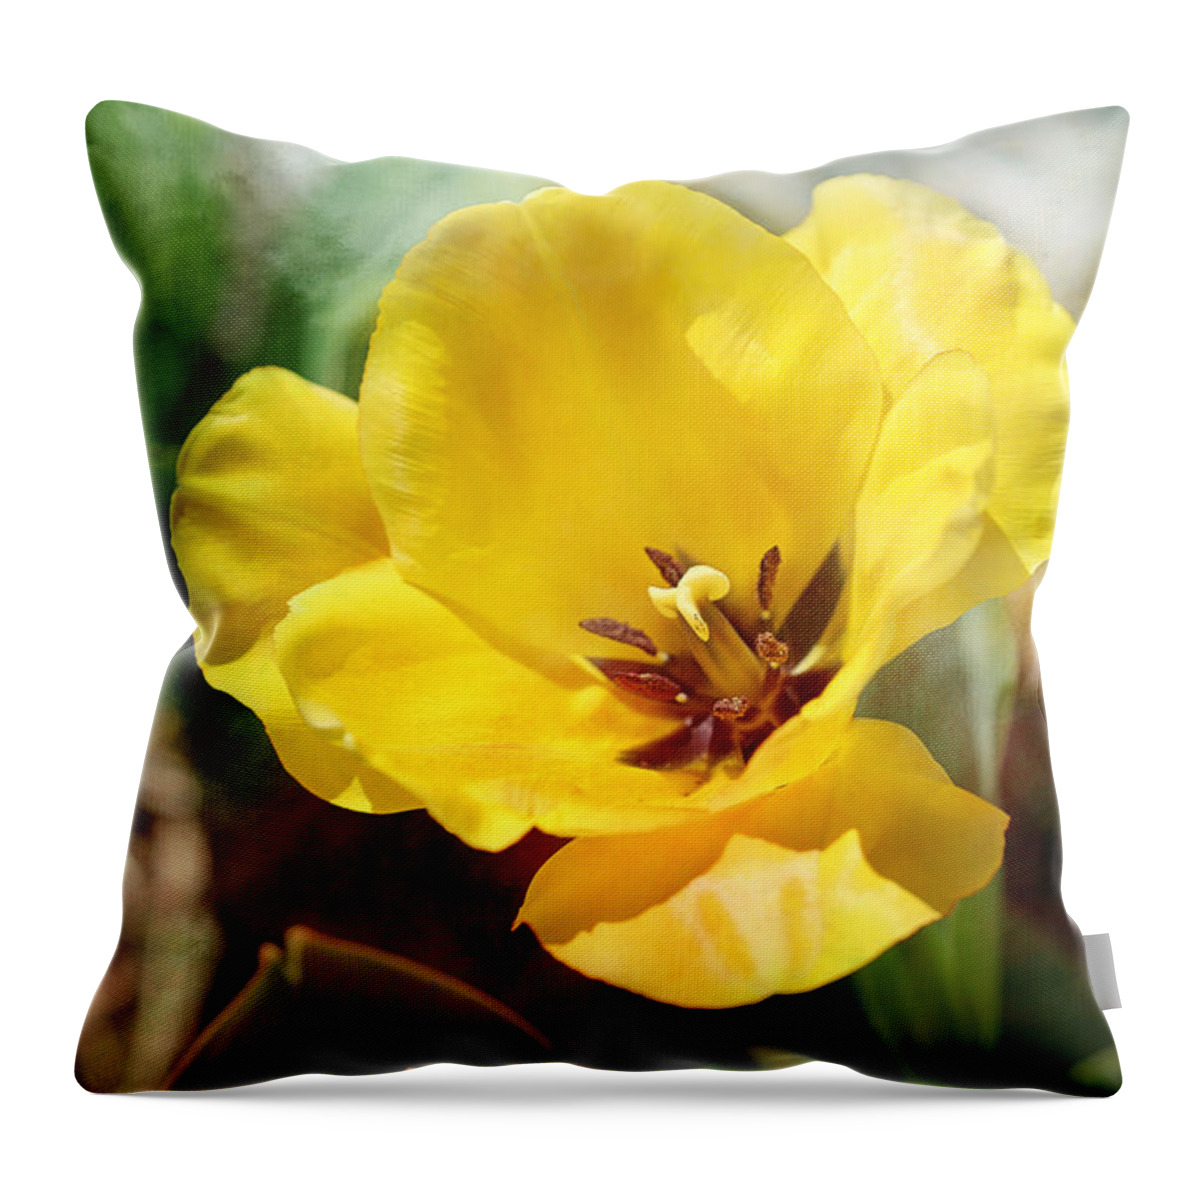 Water Lily Throw Pillow featuring the photograph Water Lily Tulip Flower by Theresa Campbell